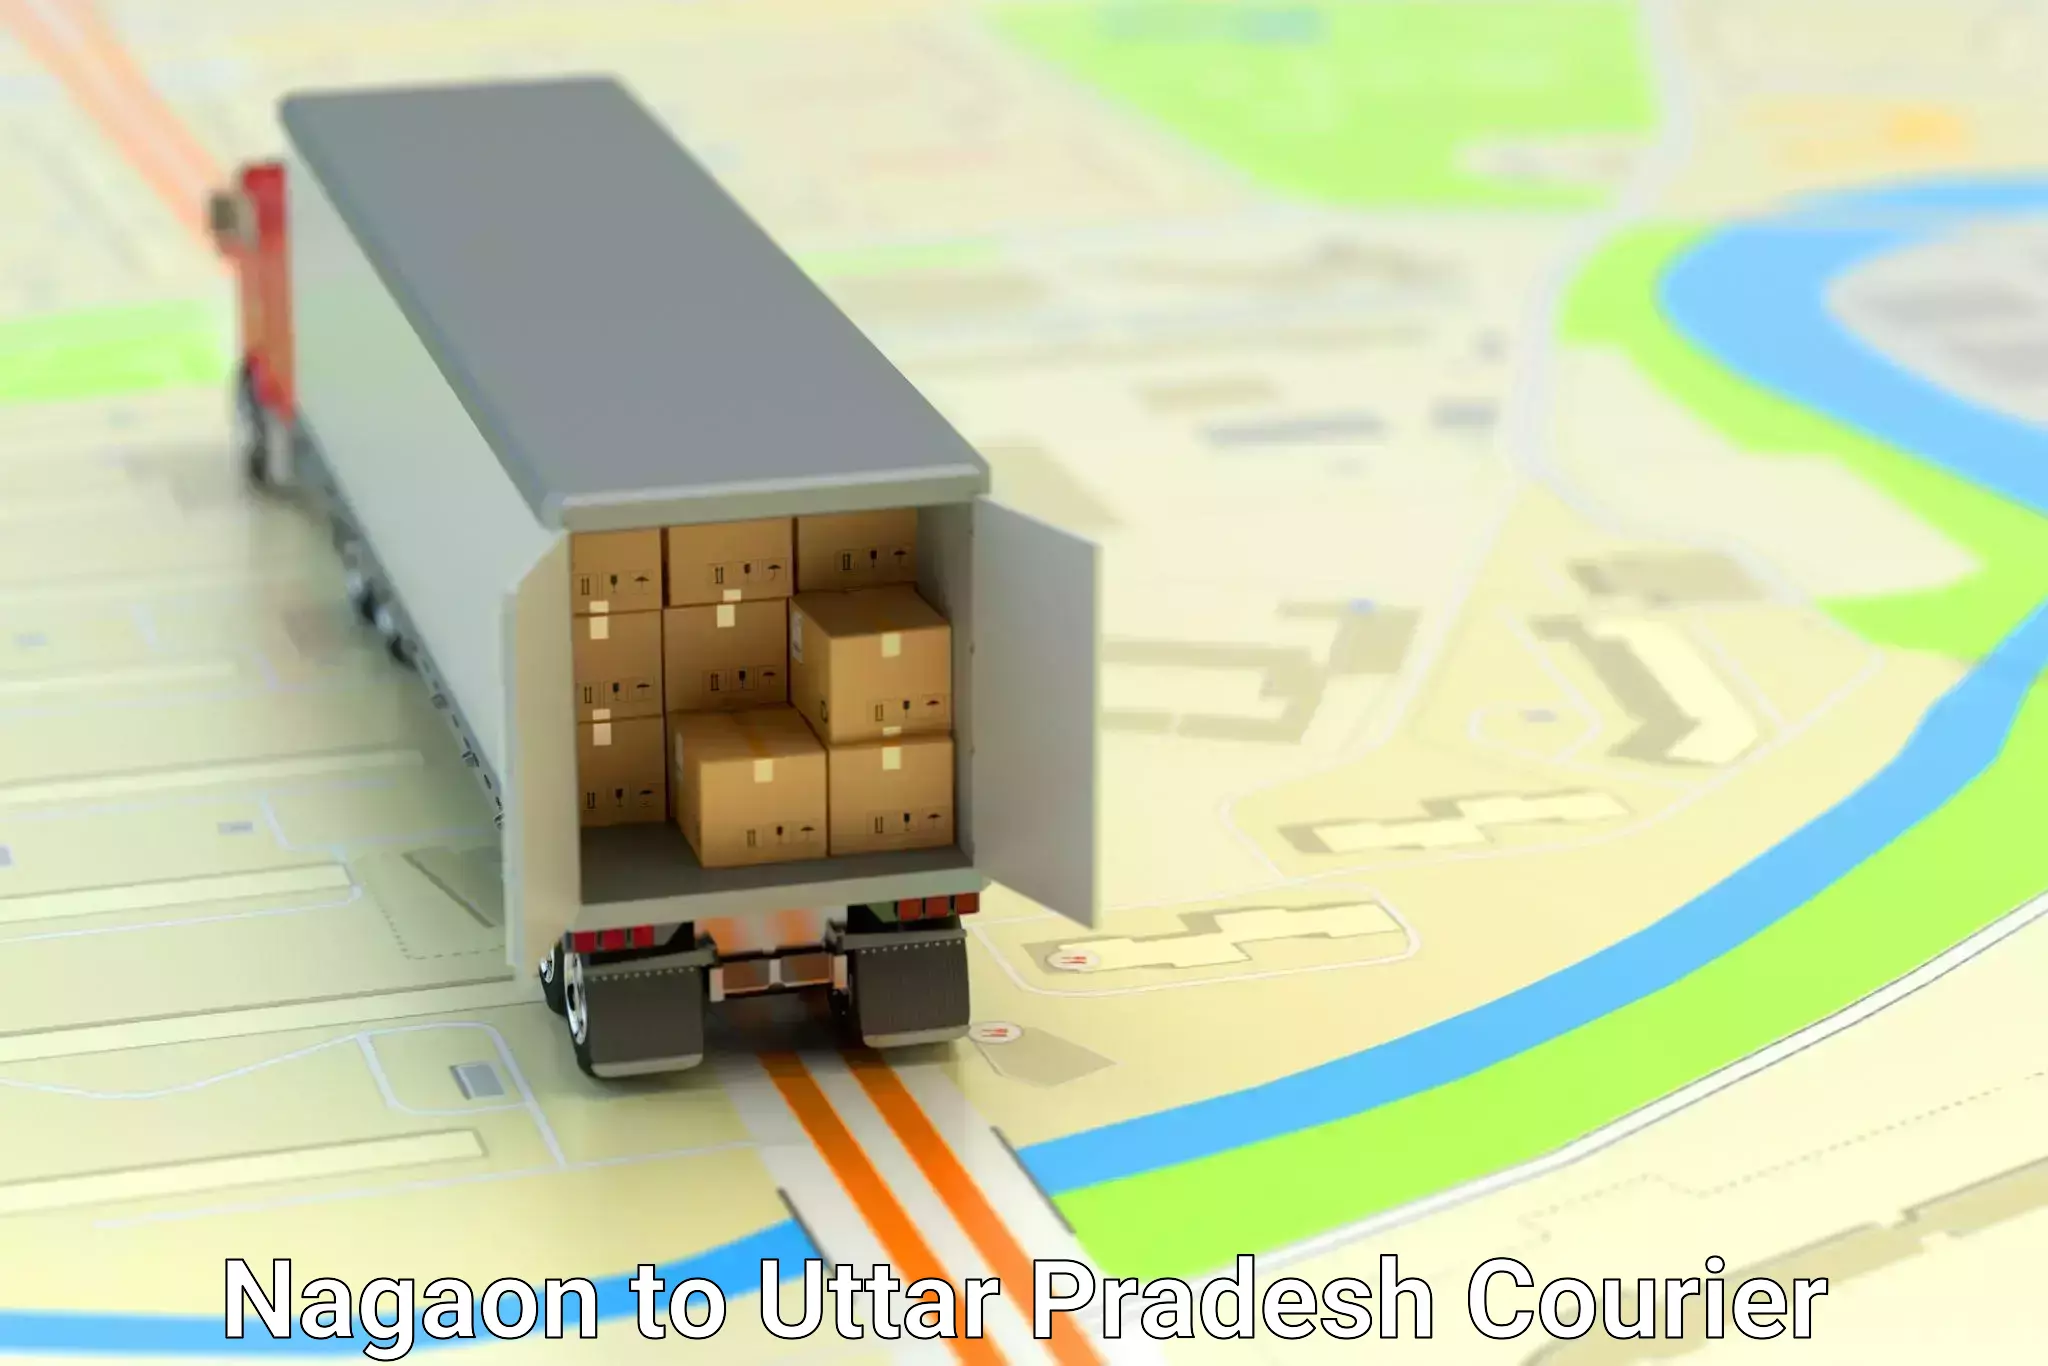 Express delivery network Nagaon to Meerut